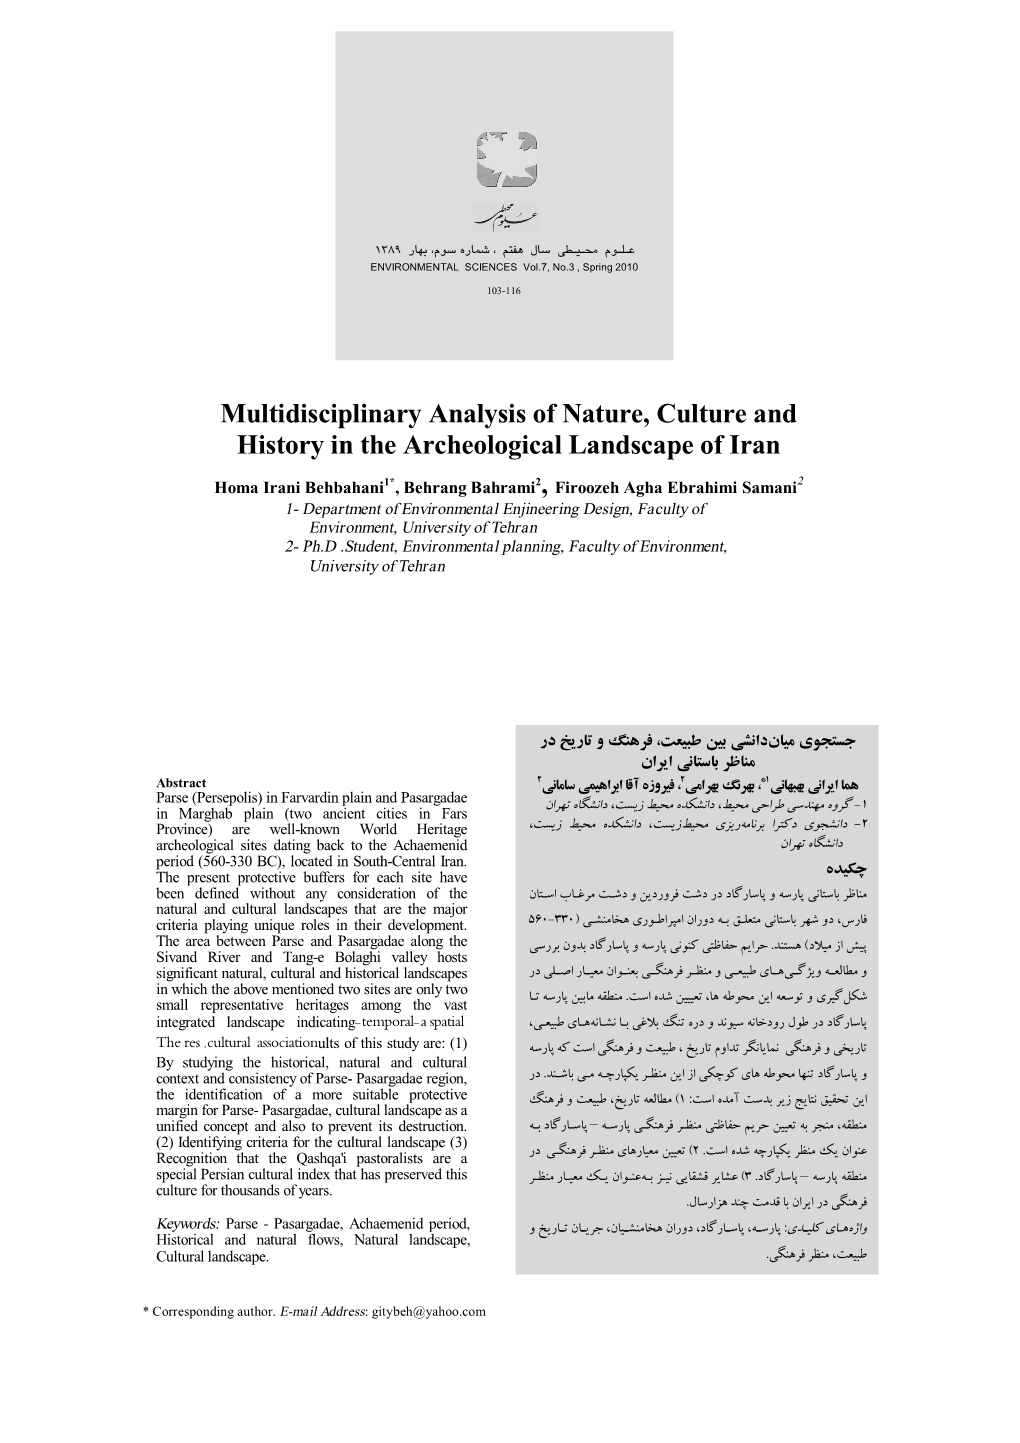 Multidisciplinary Analysis of Nature, Culture and History in the Archeological Landscape of Iran